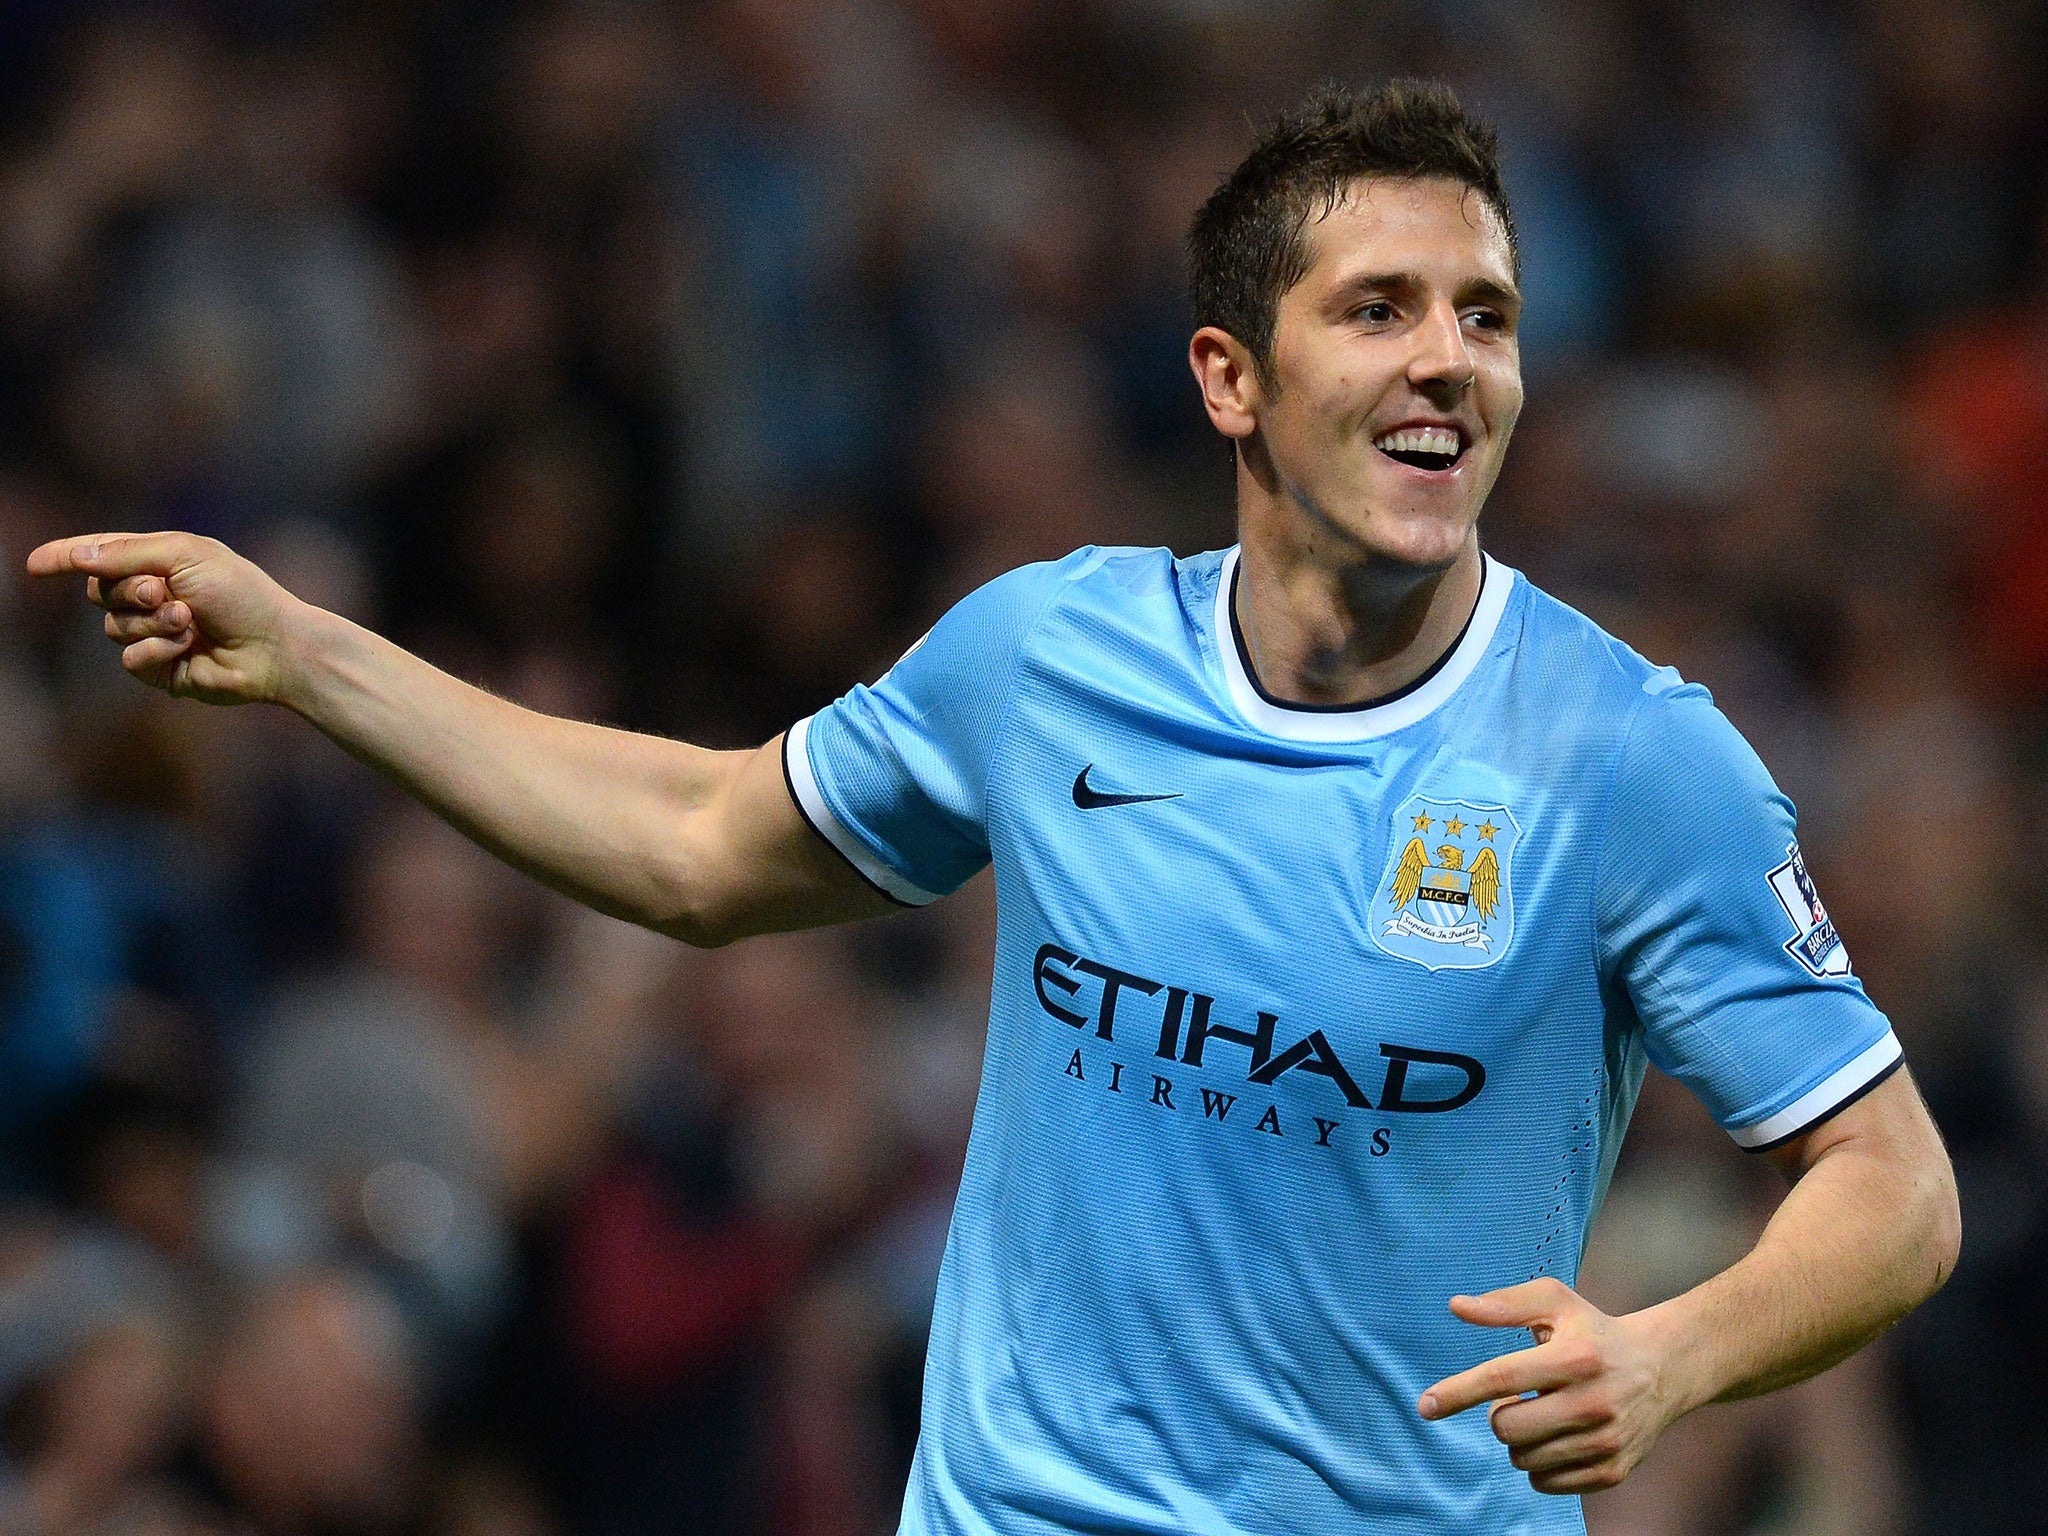 Manchester City striker Stevan Jovetic could make his awaited return from injury in the League Cup semi-final second leg against West Ham